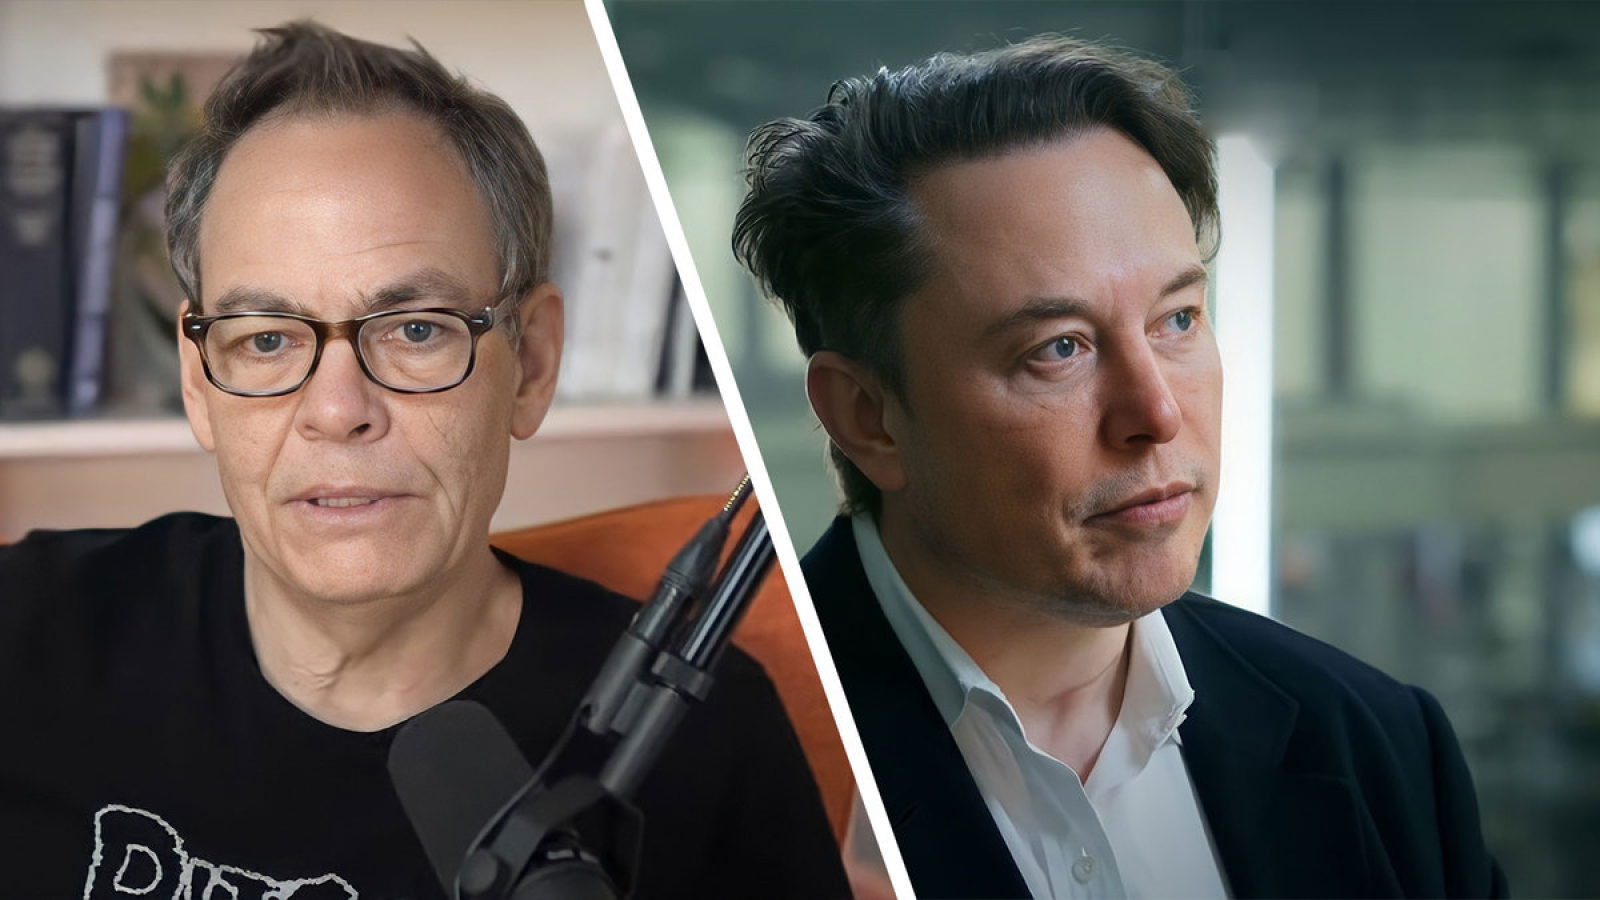 Max Keiser and Elon Musk Criticize AI, Here's What Bitcoin (BTC) Has to Do With It